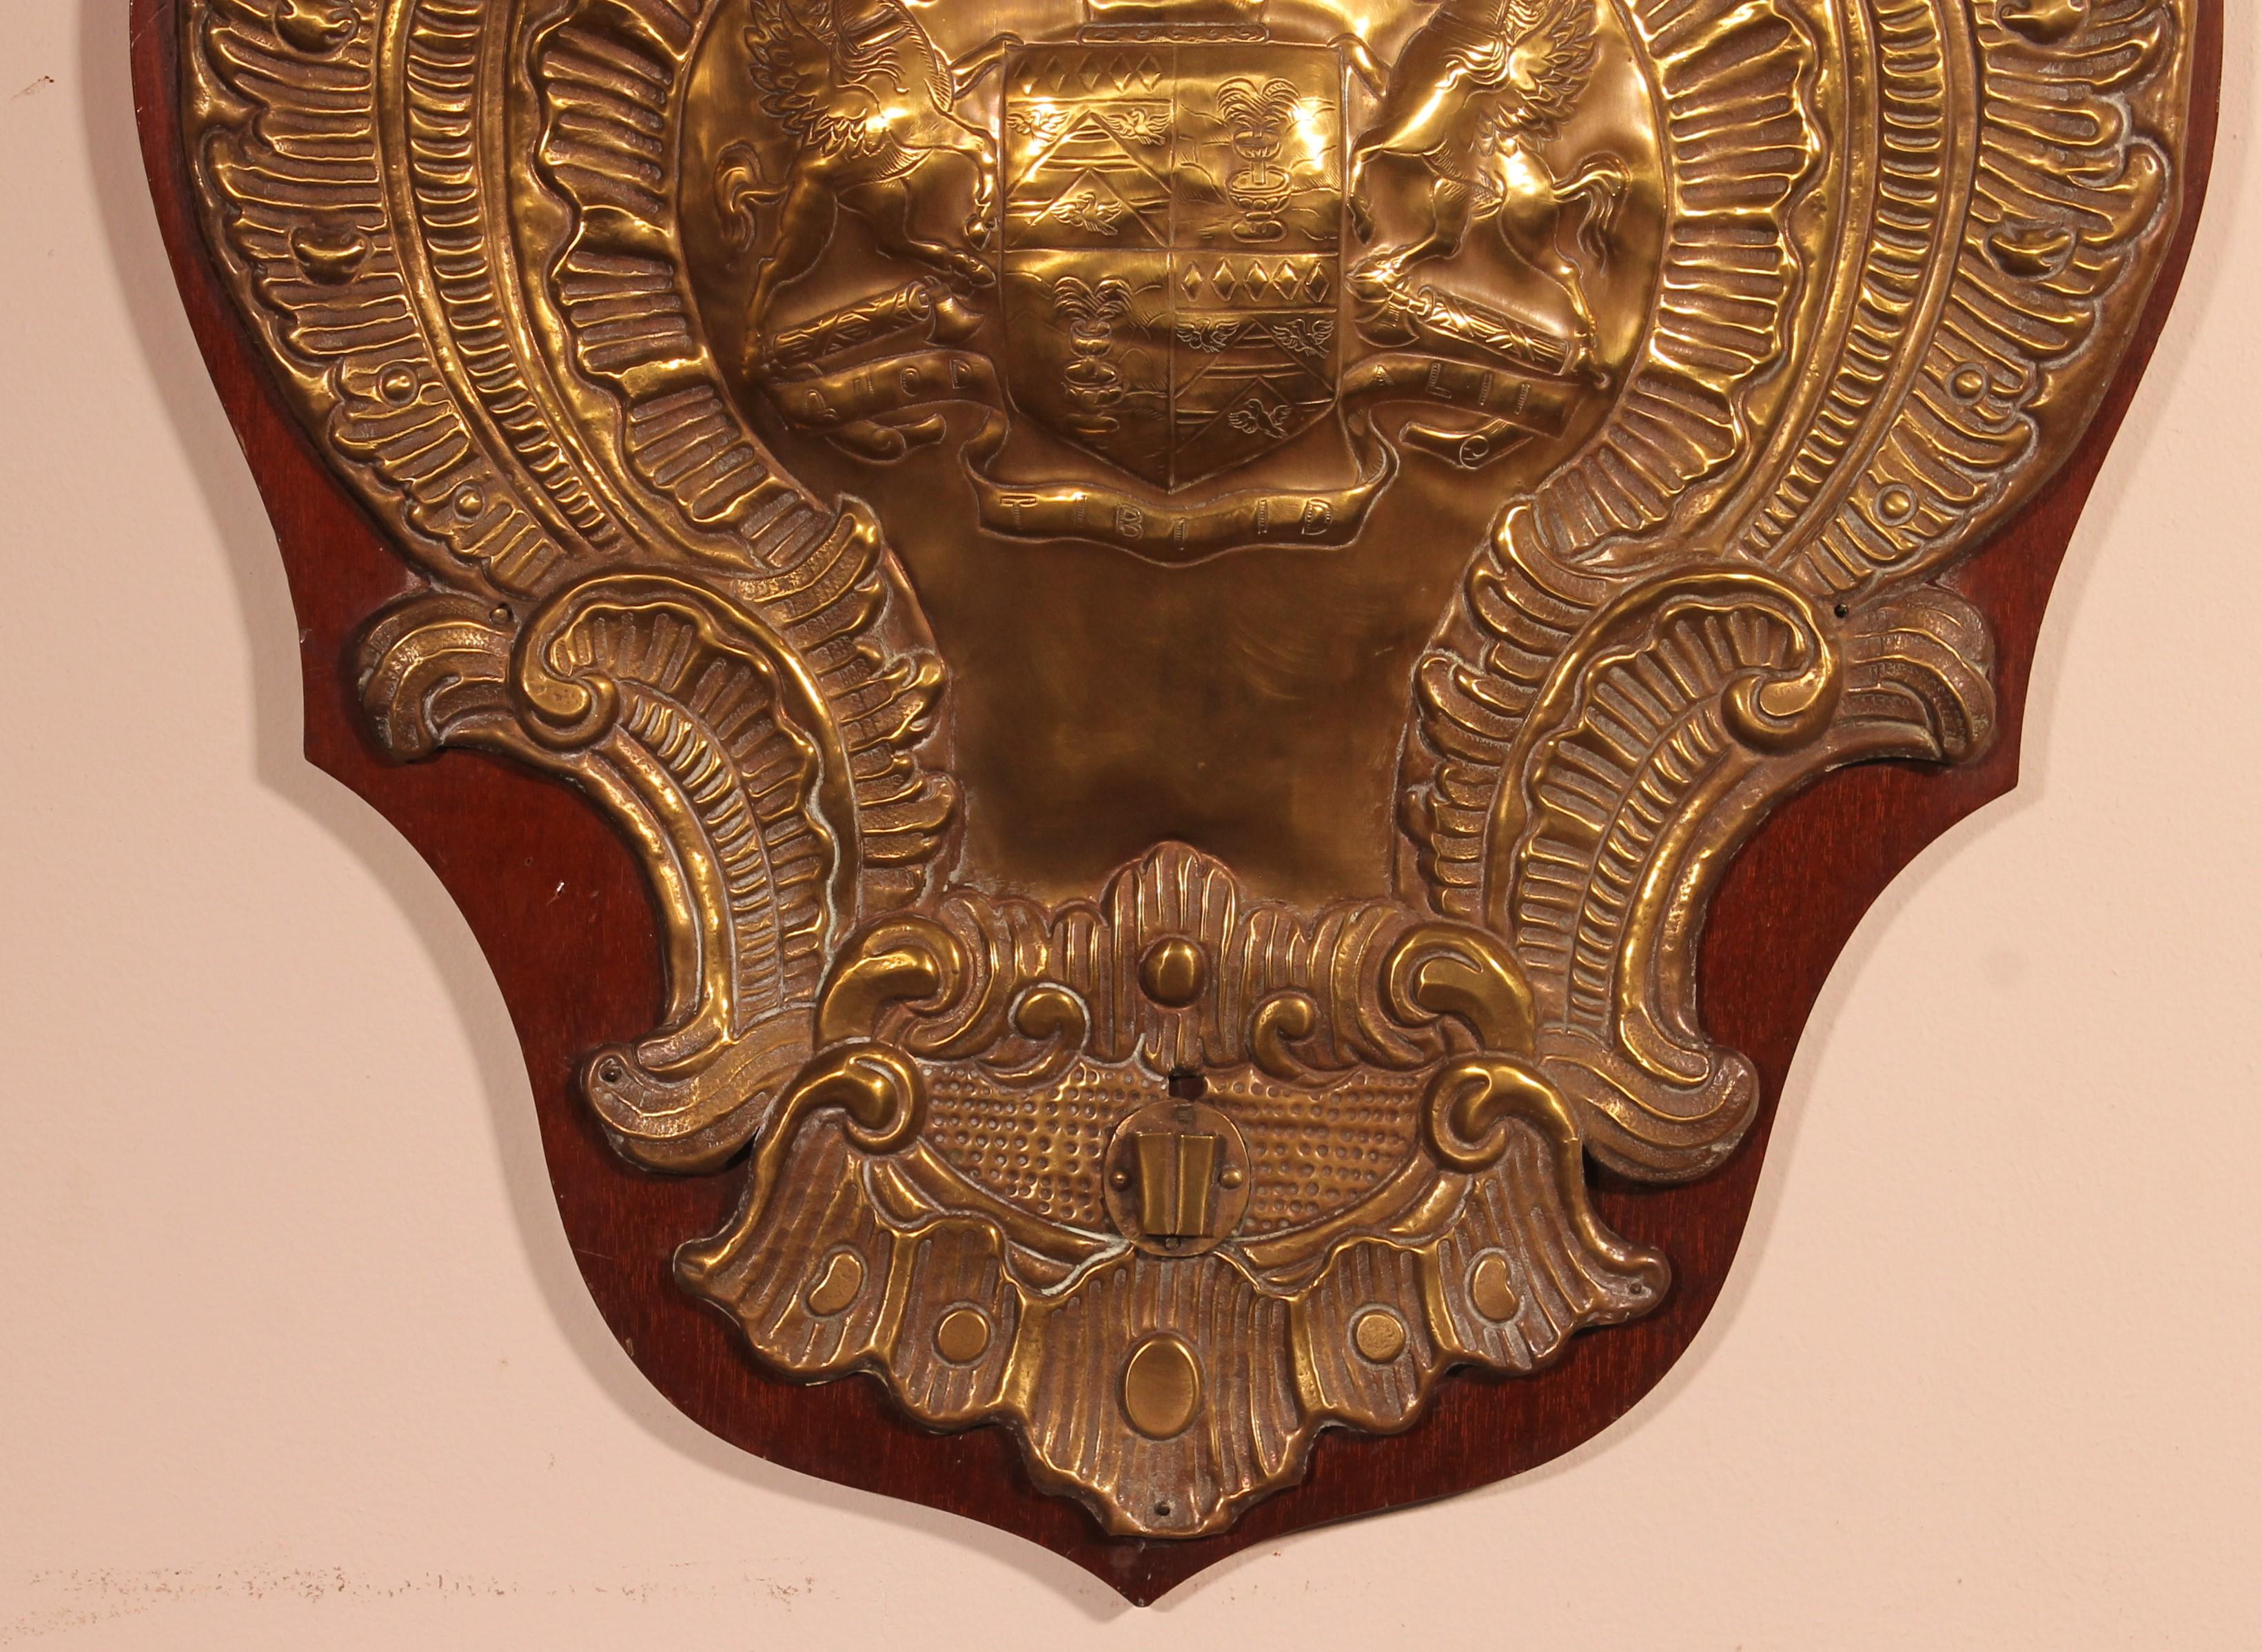 Superb copper wall pannel representing the coat of arms of a 19th century English noble family.
It rests on a mahogany frame.
Very nice work.
Object of curiosity.
 